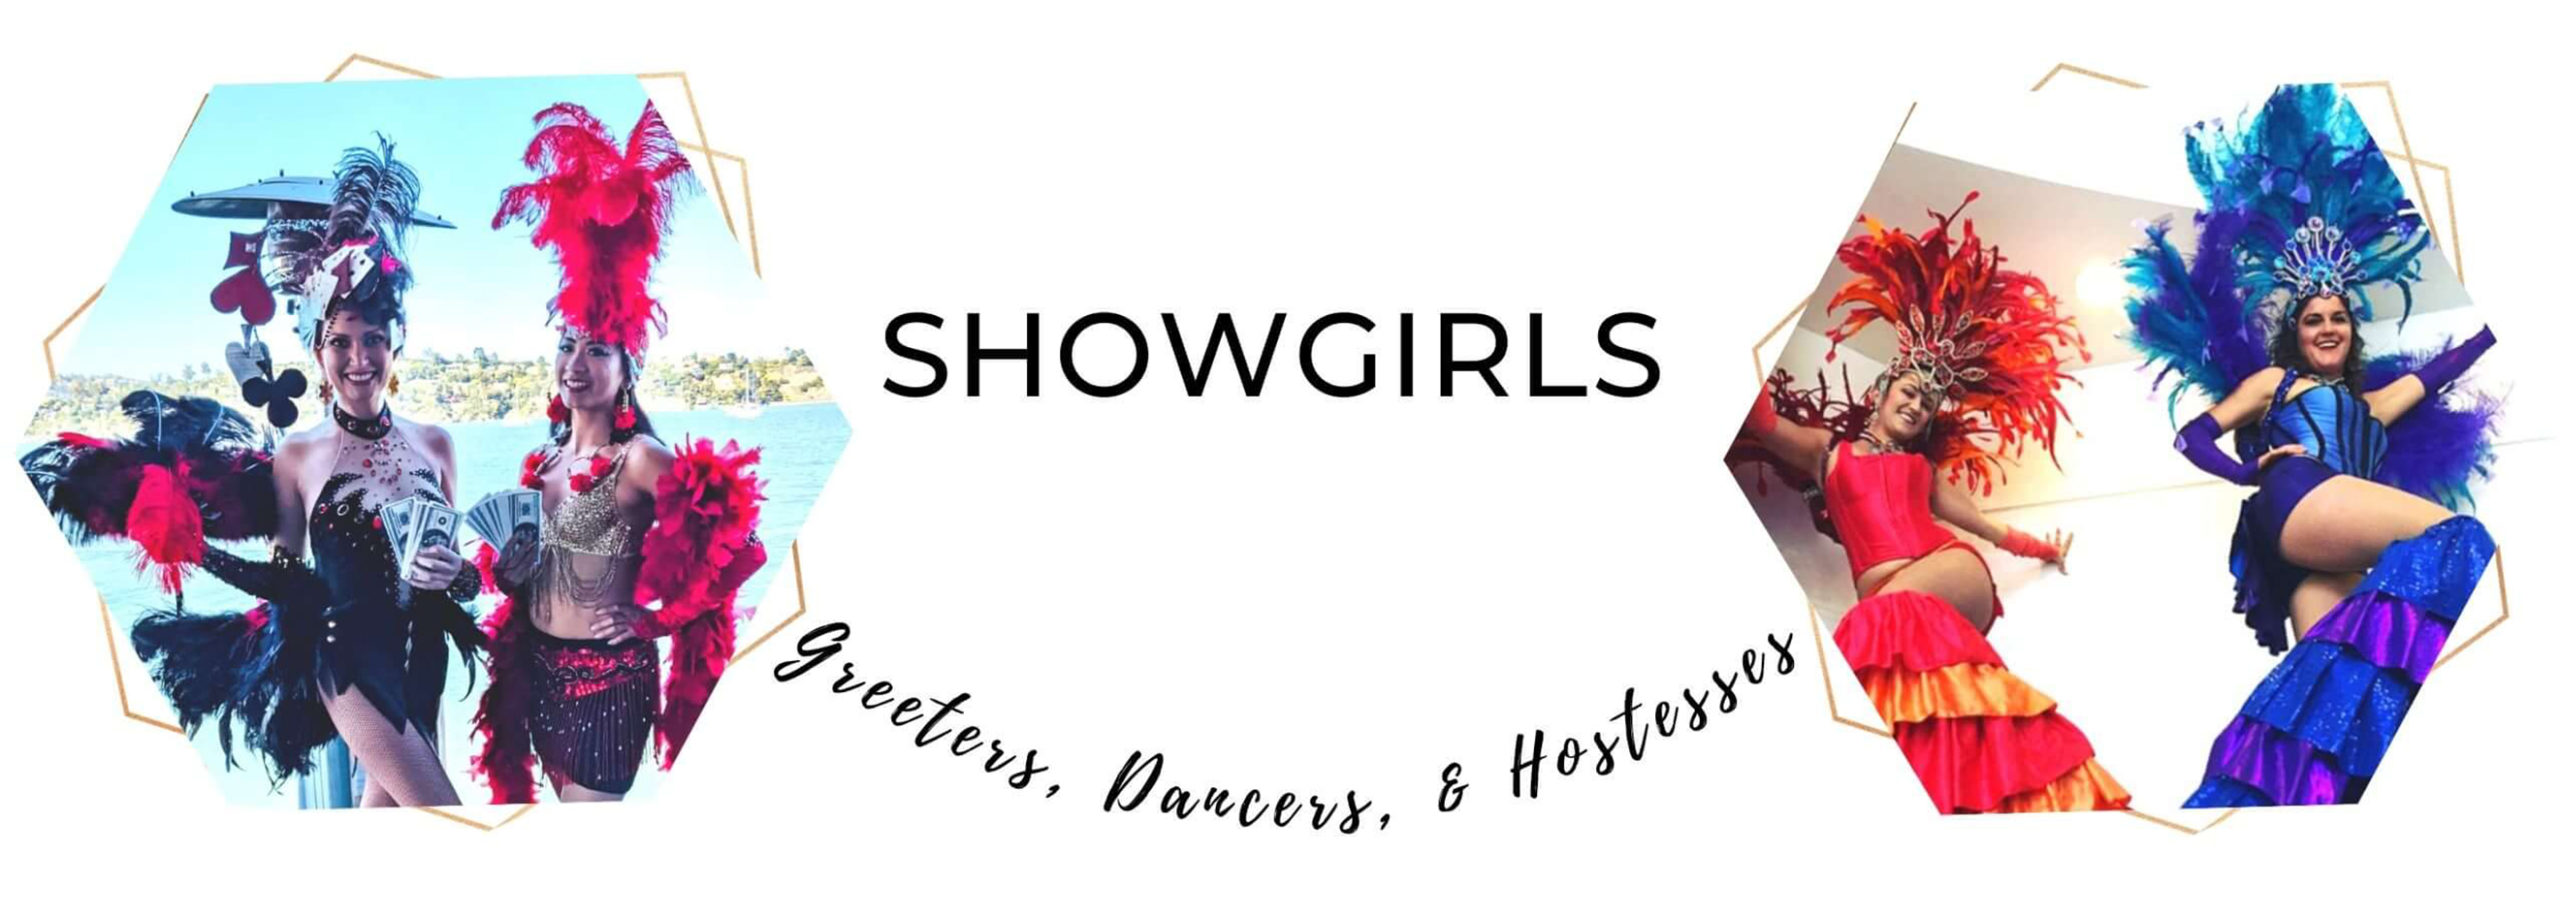 Showgirls booking for events in California by Catalyst Arts Entertainment